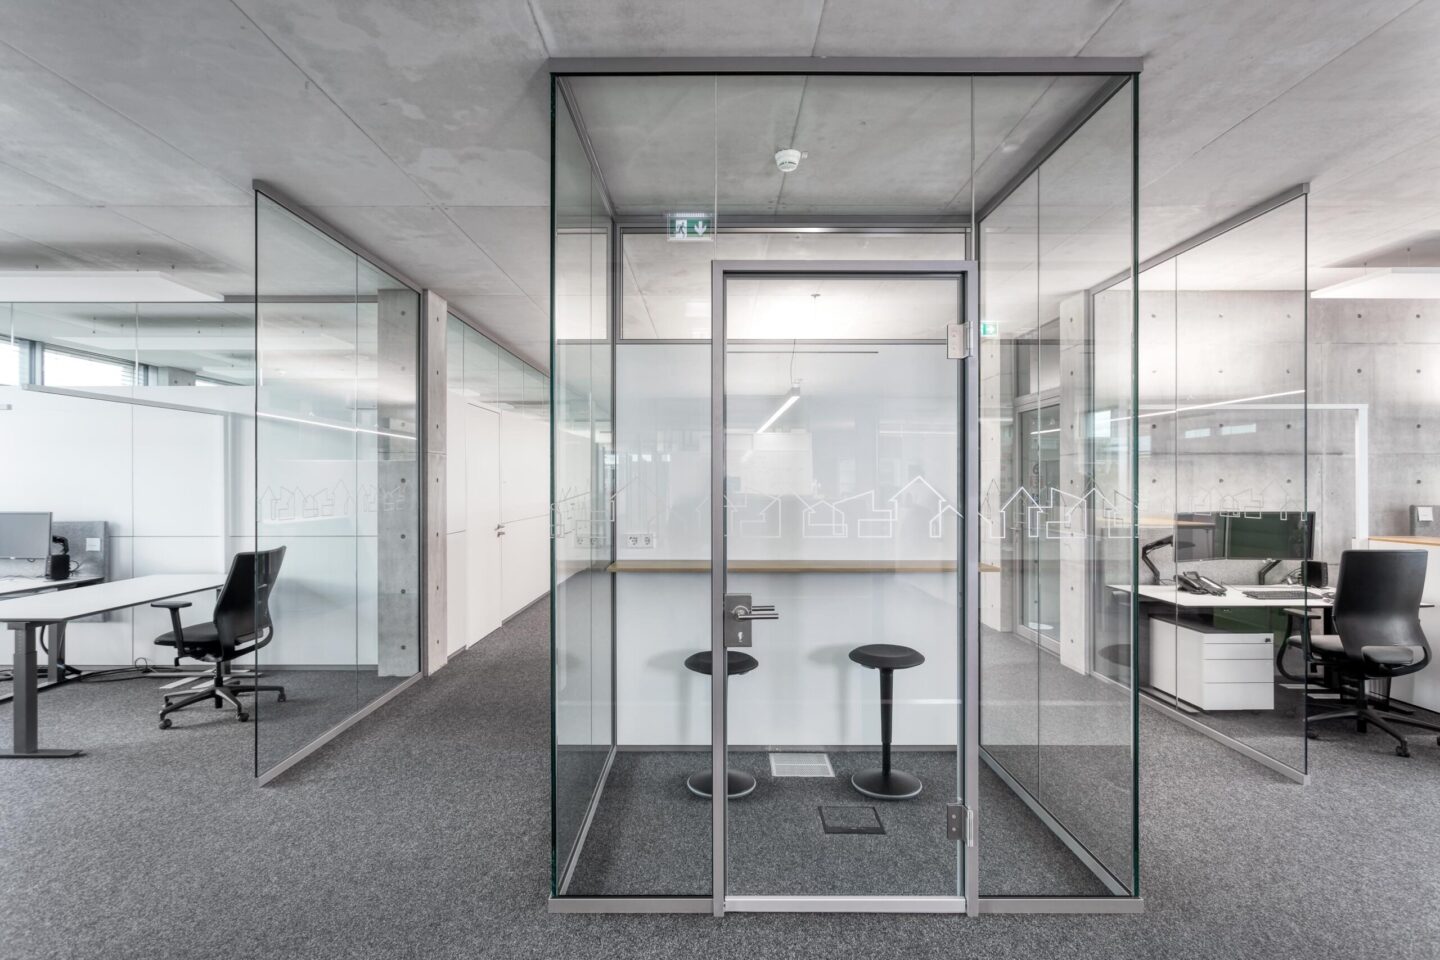 weisenburger │ partition wall systems │ projects │ fecoplan all-glass construction